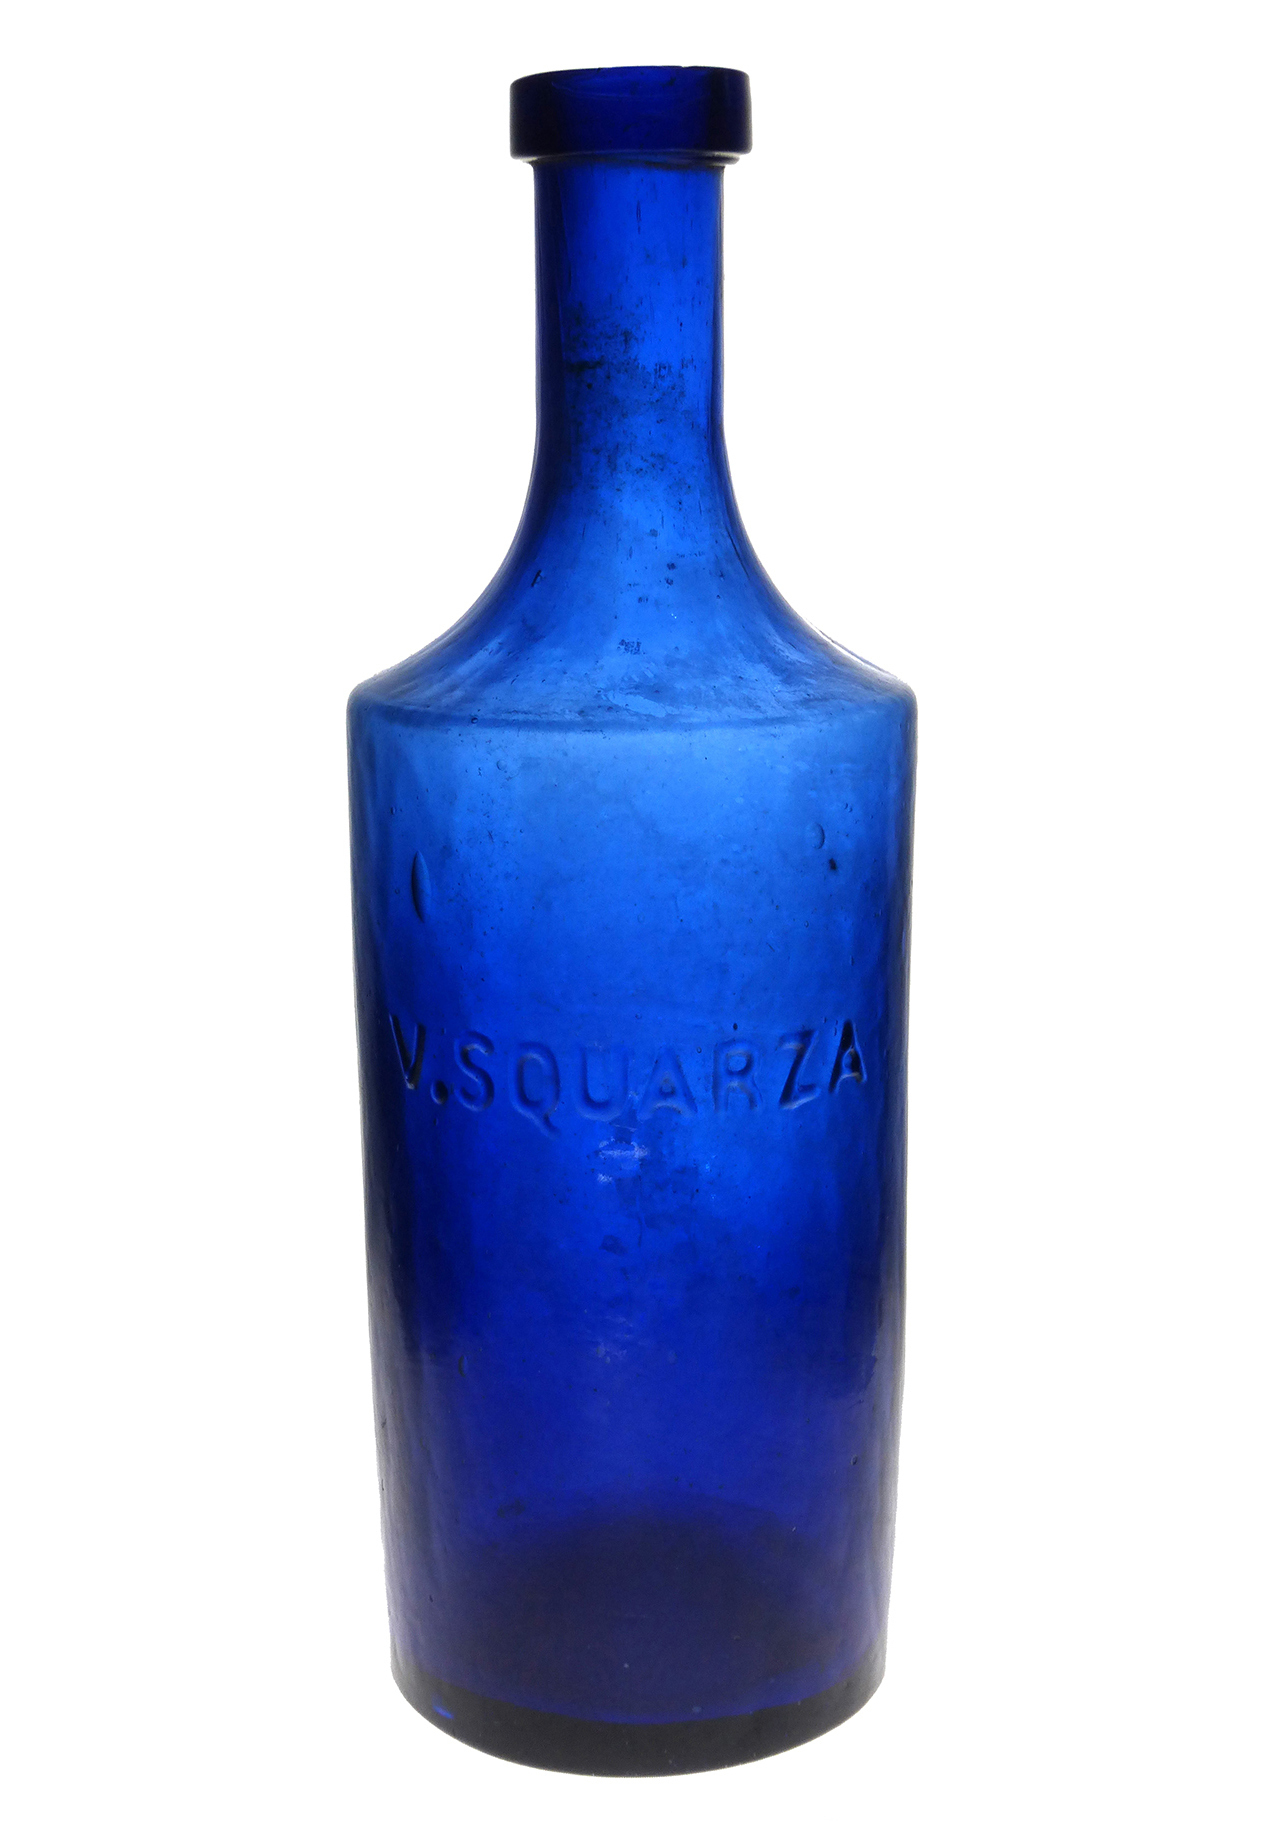 Circa-1860s Vincent Squarza blue glass medicine bottle, one of five known, and one of the many examples that will be on view at the 2022 National Antique Bottle Convention in Reno, Nevada, taking place from July 28-31. Image courtesy of the Federation of Historical Bottle Collectors (FOHBC).